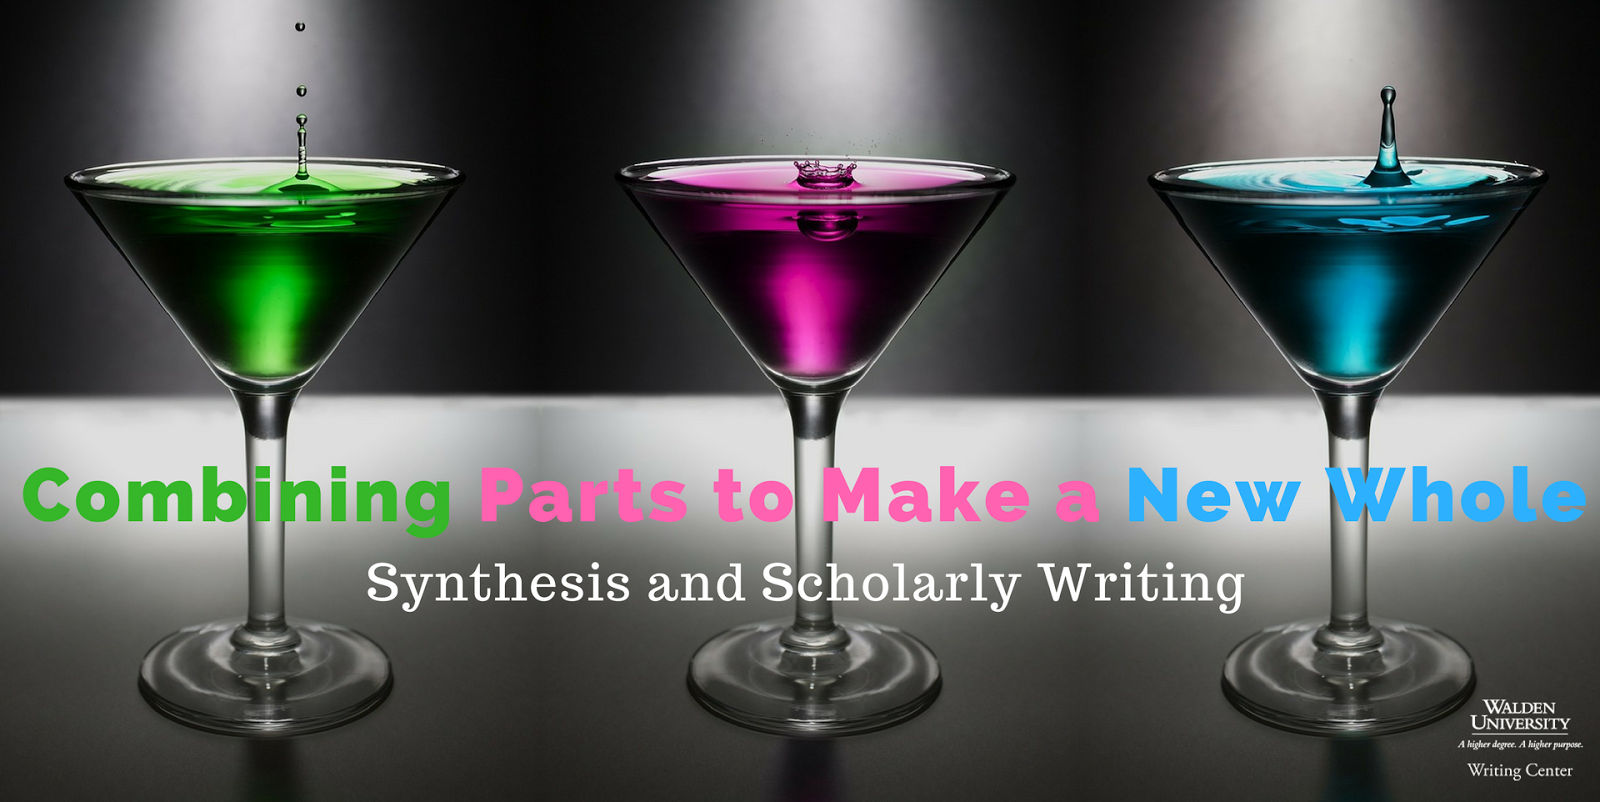 synthesis-and-scholarly-writing-part-2-putting-synthesis-to-work